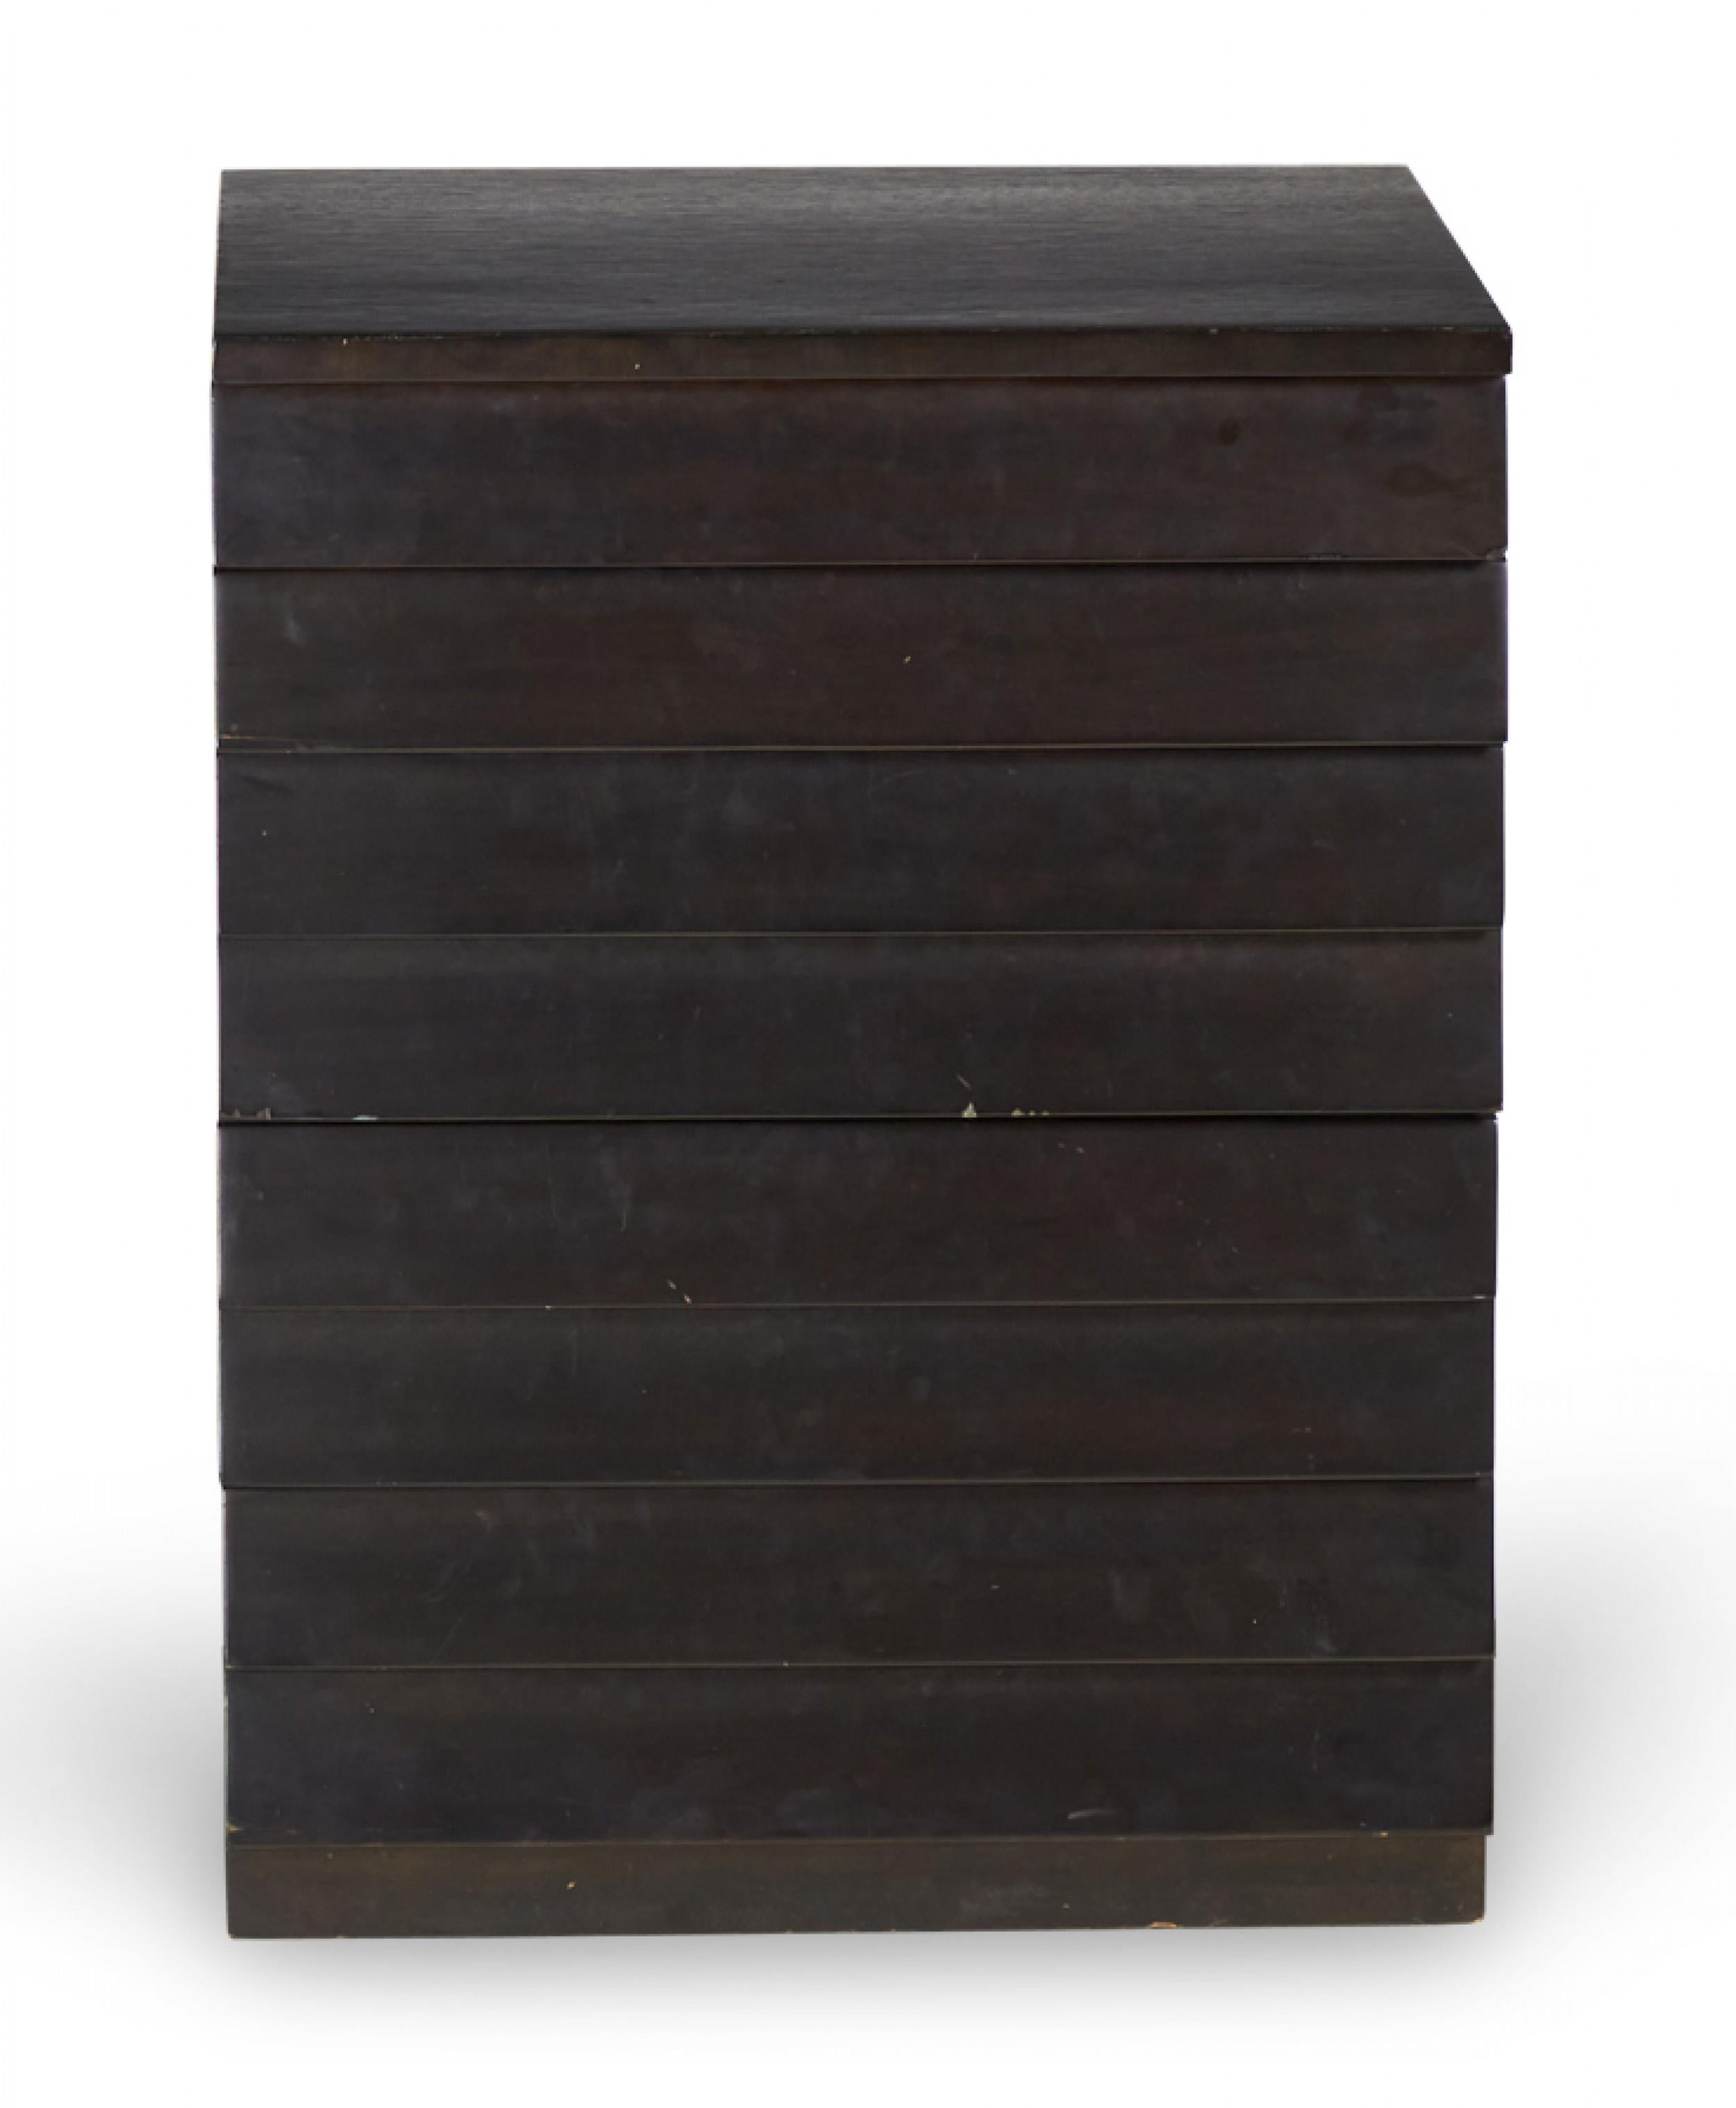 American mid-century dark stained walnut chest / nightstand with a louver-style front concealing two small drawer and 3 larger drawers below. (T.H. Robsjohn-Gibbings for Widdicomb).
   